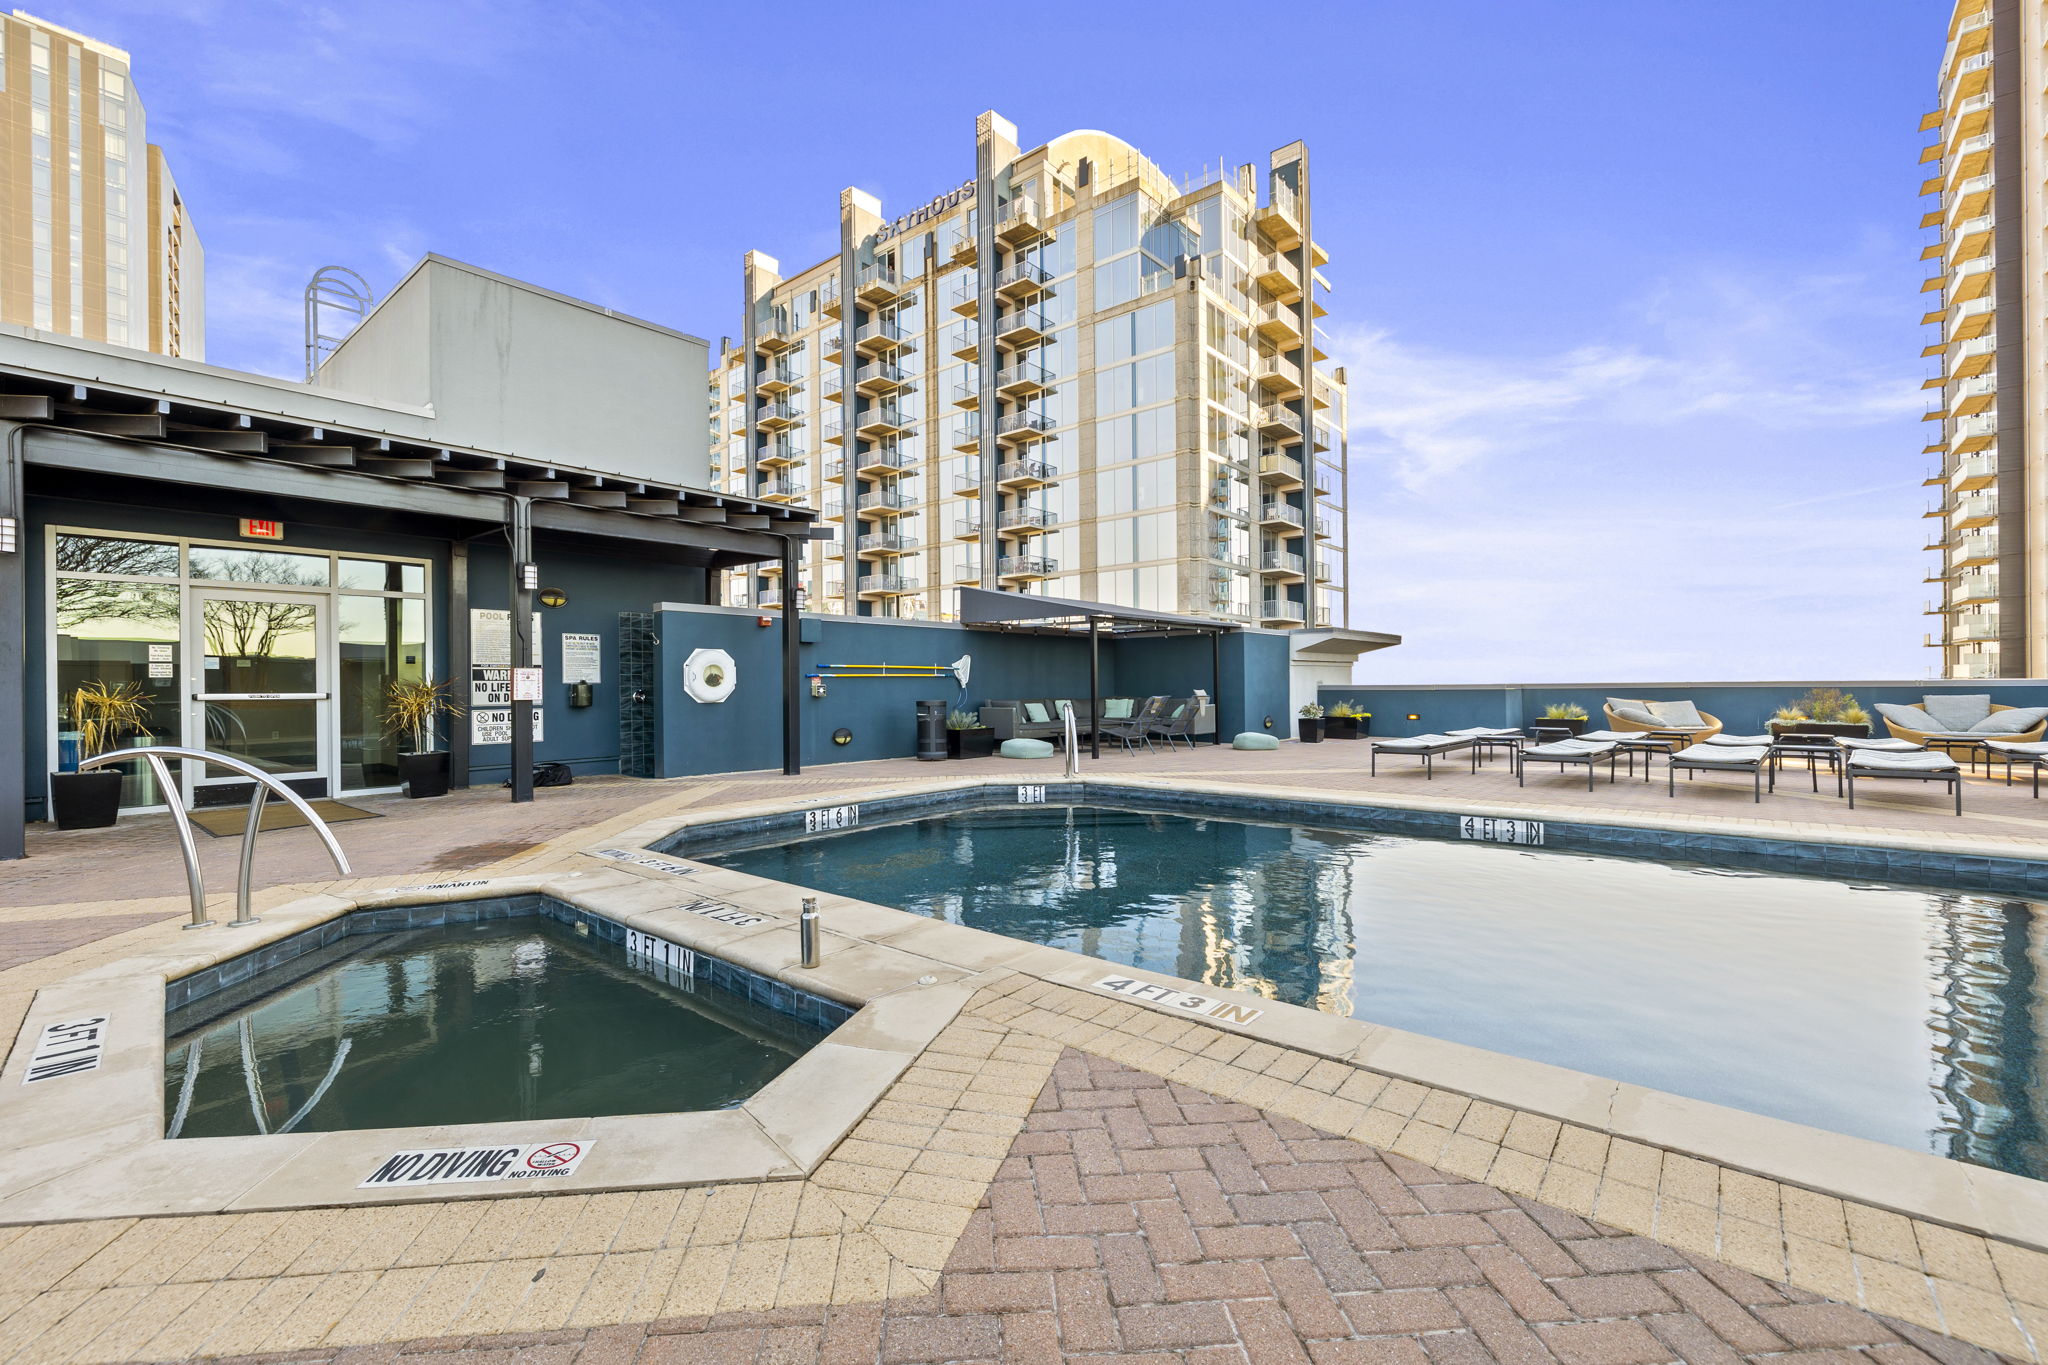 The community pool and hot tub are on the top floor.